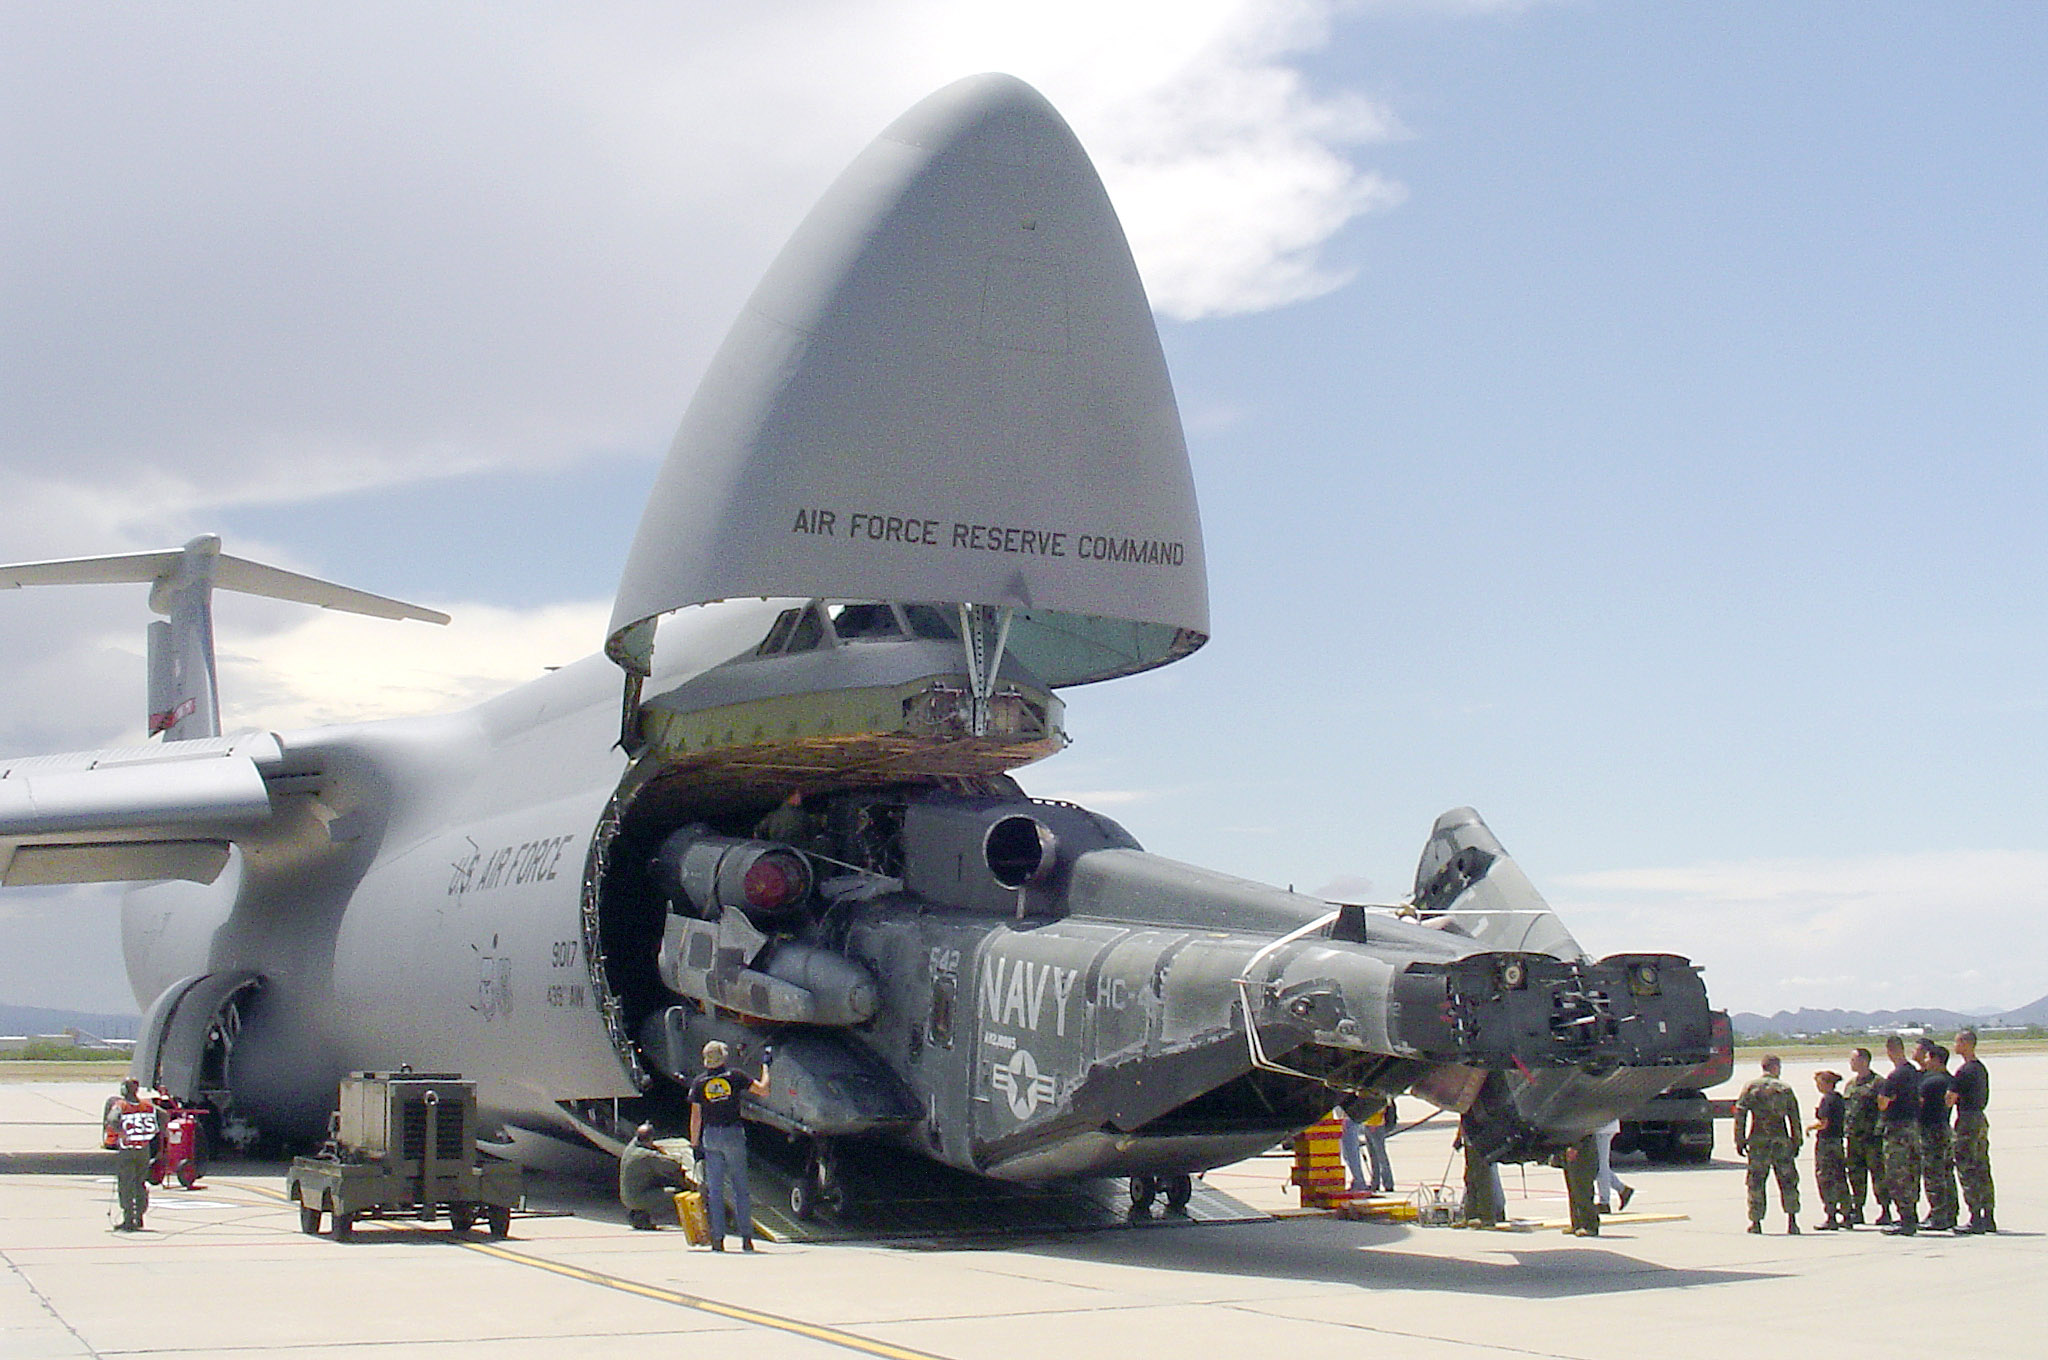 The C-5 can swallow helicopters with ease.